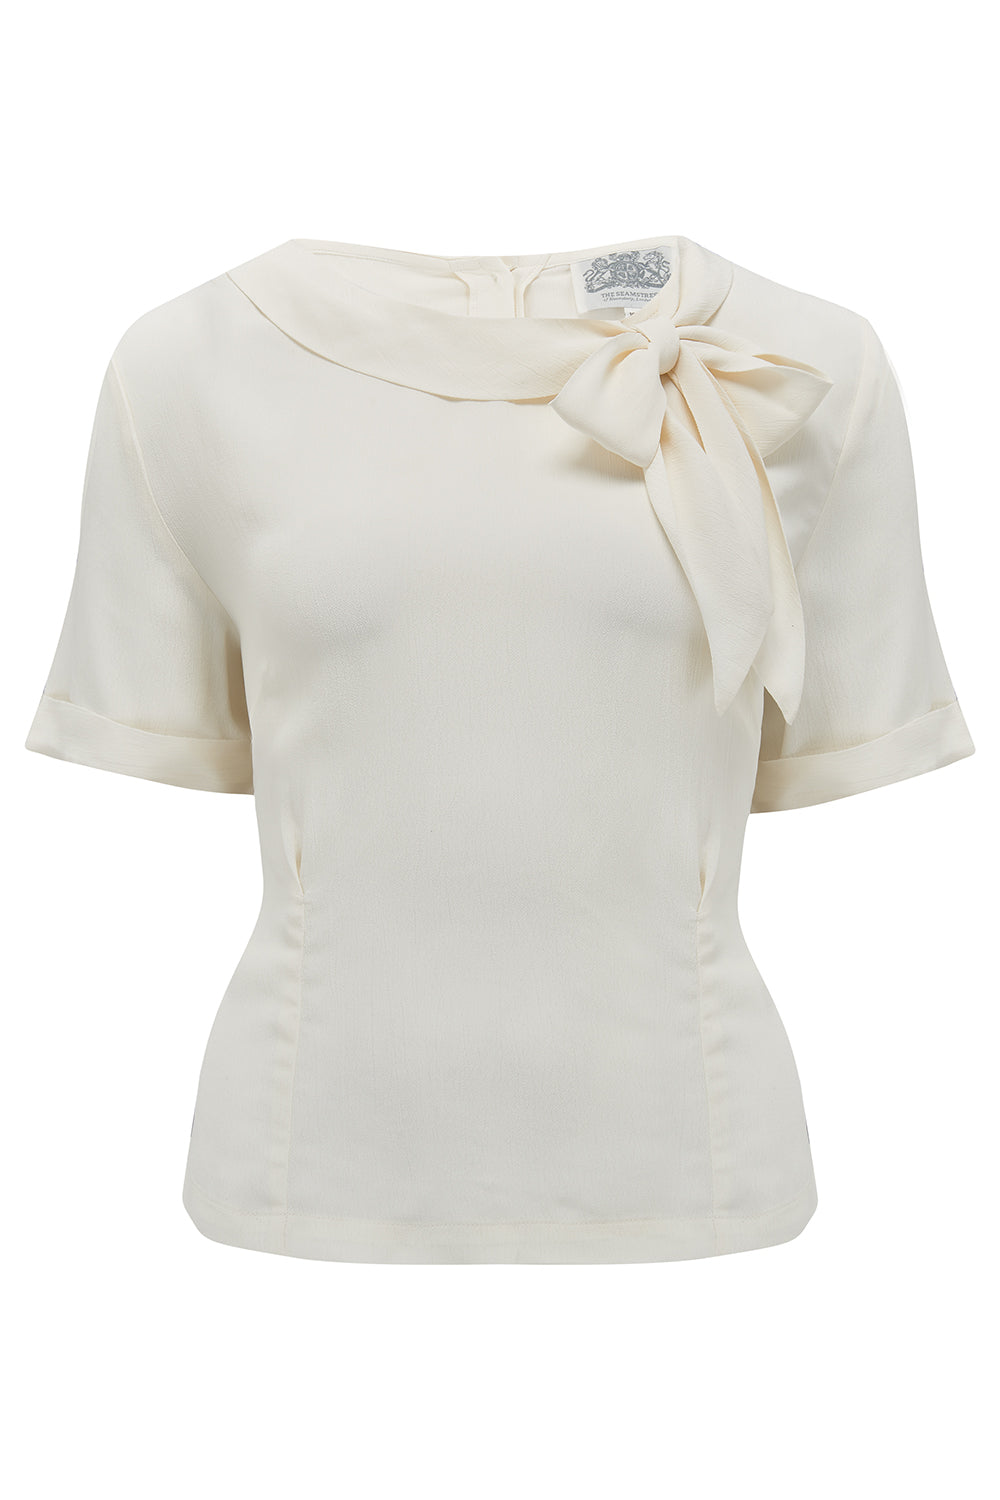 Cindy Blouse In Cream , Classic 1940s Vintage Inspired Style - True and authentic vintage style clothing, inspired by the Classic styles of CC41 , WW2 and the fun 1950s RocknRoll era, for everyday wear plus events like Goodwood Revival, Twinwood Festival and Viva Las Vegas Rockabilly Weekend Rock n Romance The Seamstress Of Bloomsbury